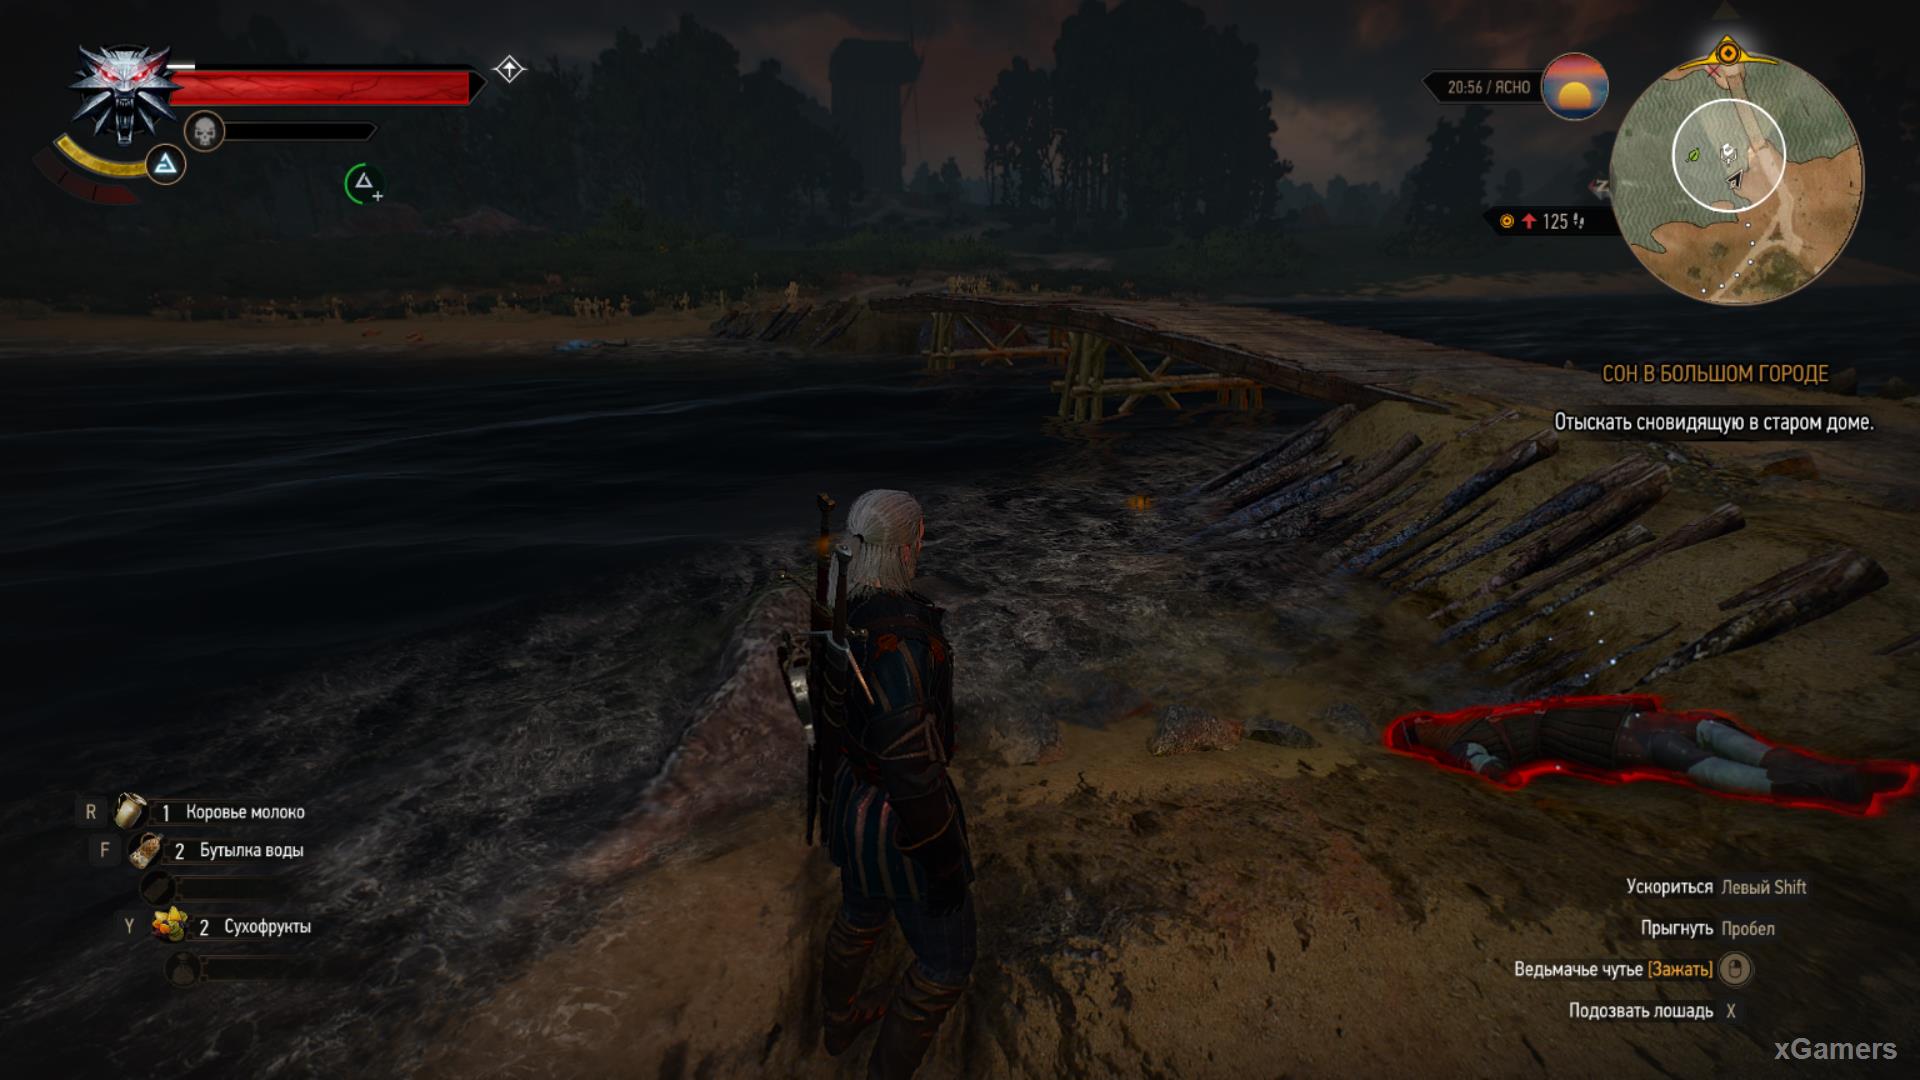 Geralt find that the bridge is guarded by two drowner